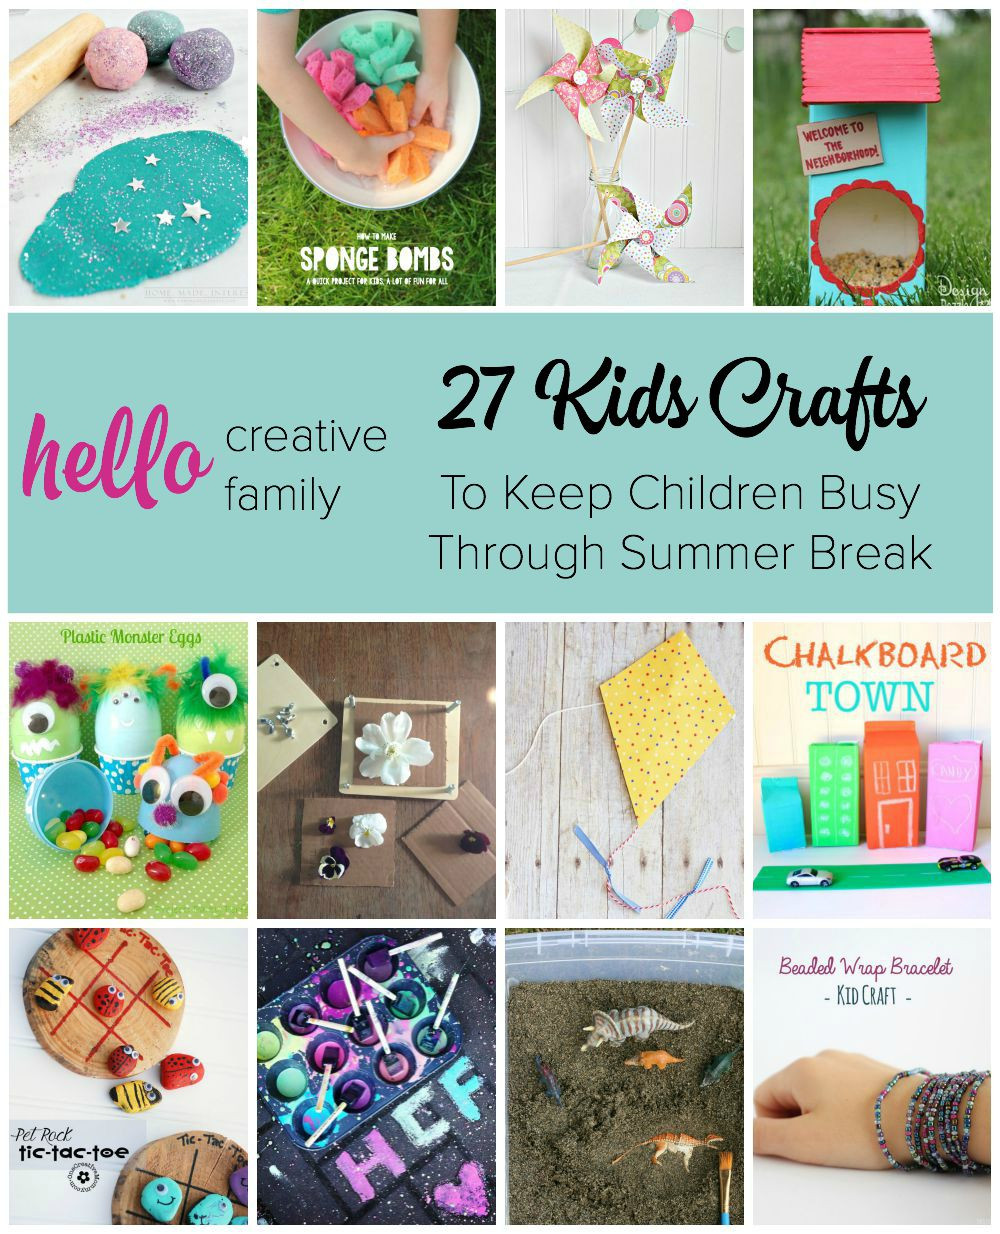 Creative Activities For Kids
 27 Kids Crafts and DIY Projects For Summer